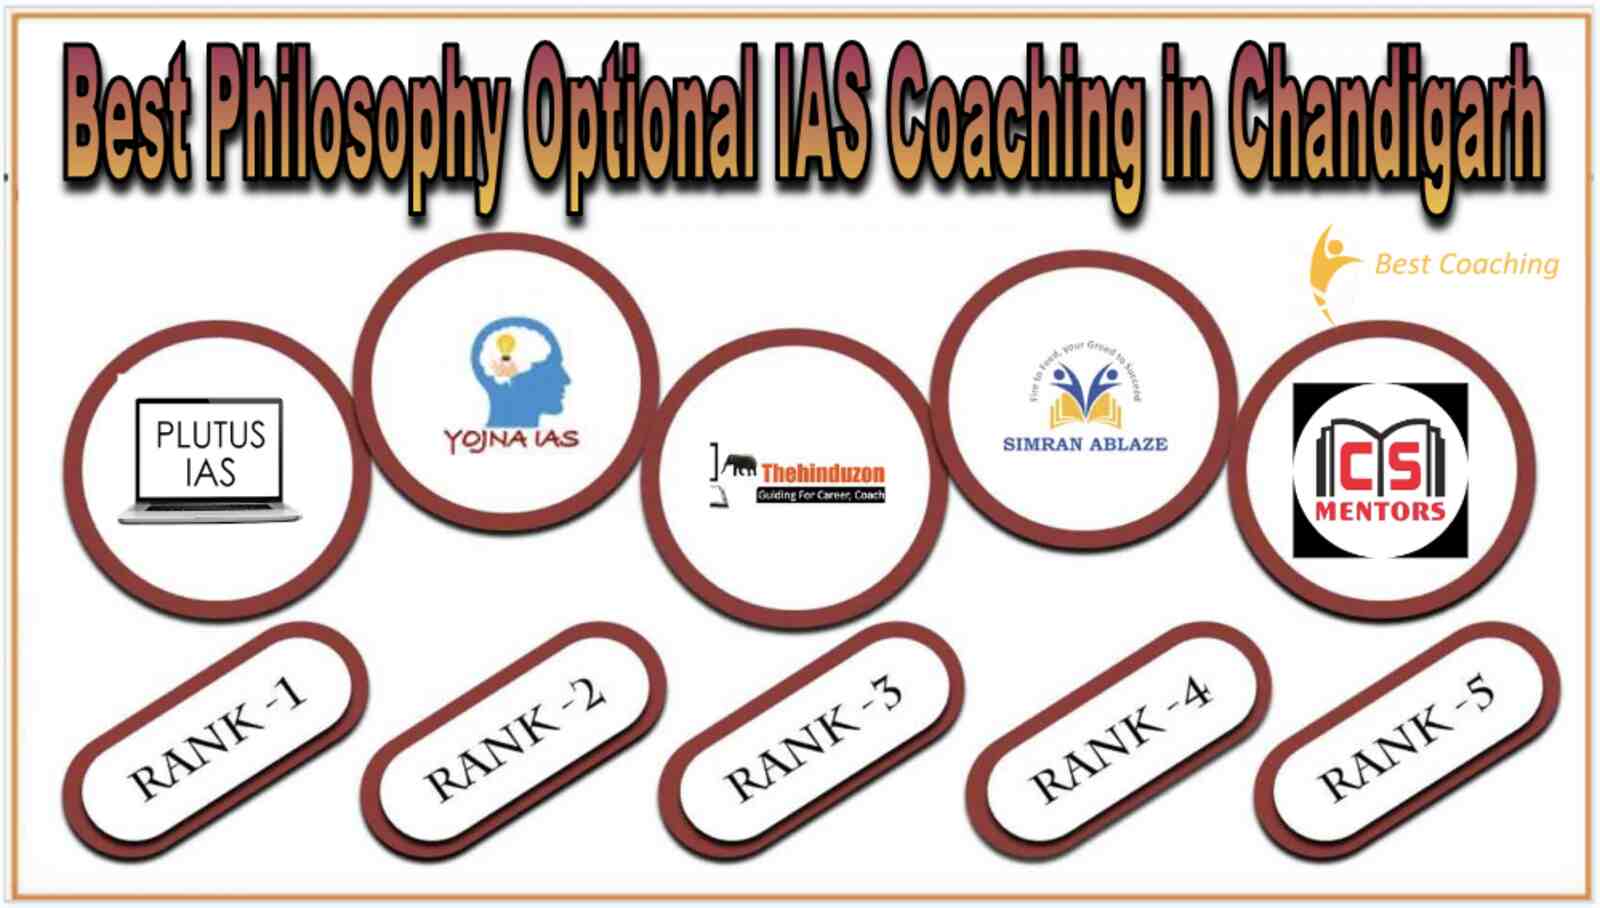 Best Philosophy Optional Coaching in India